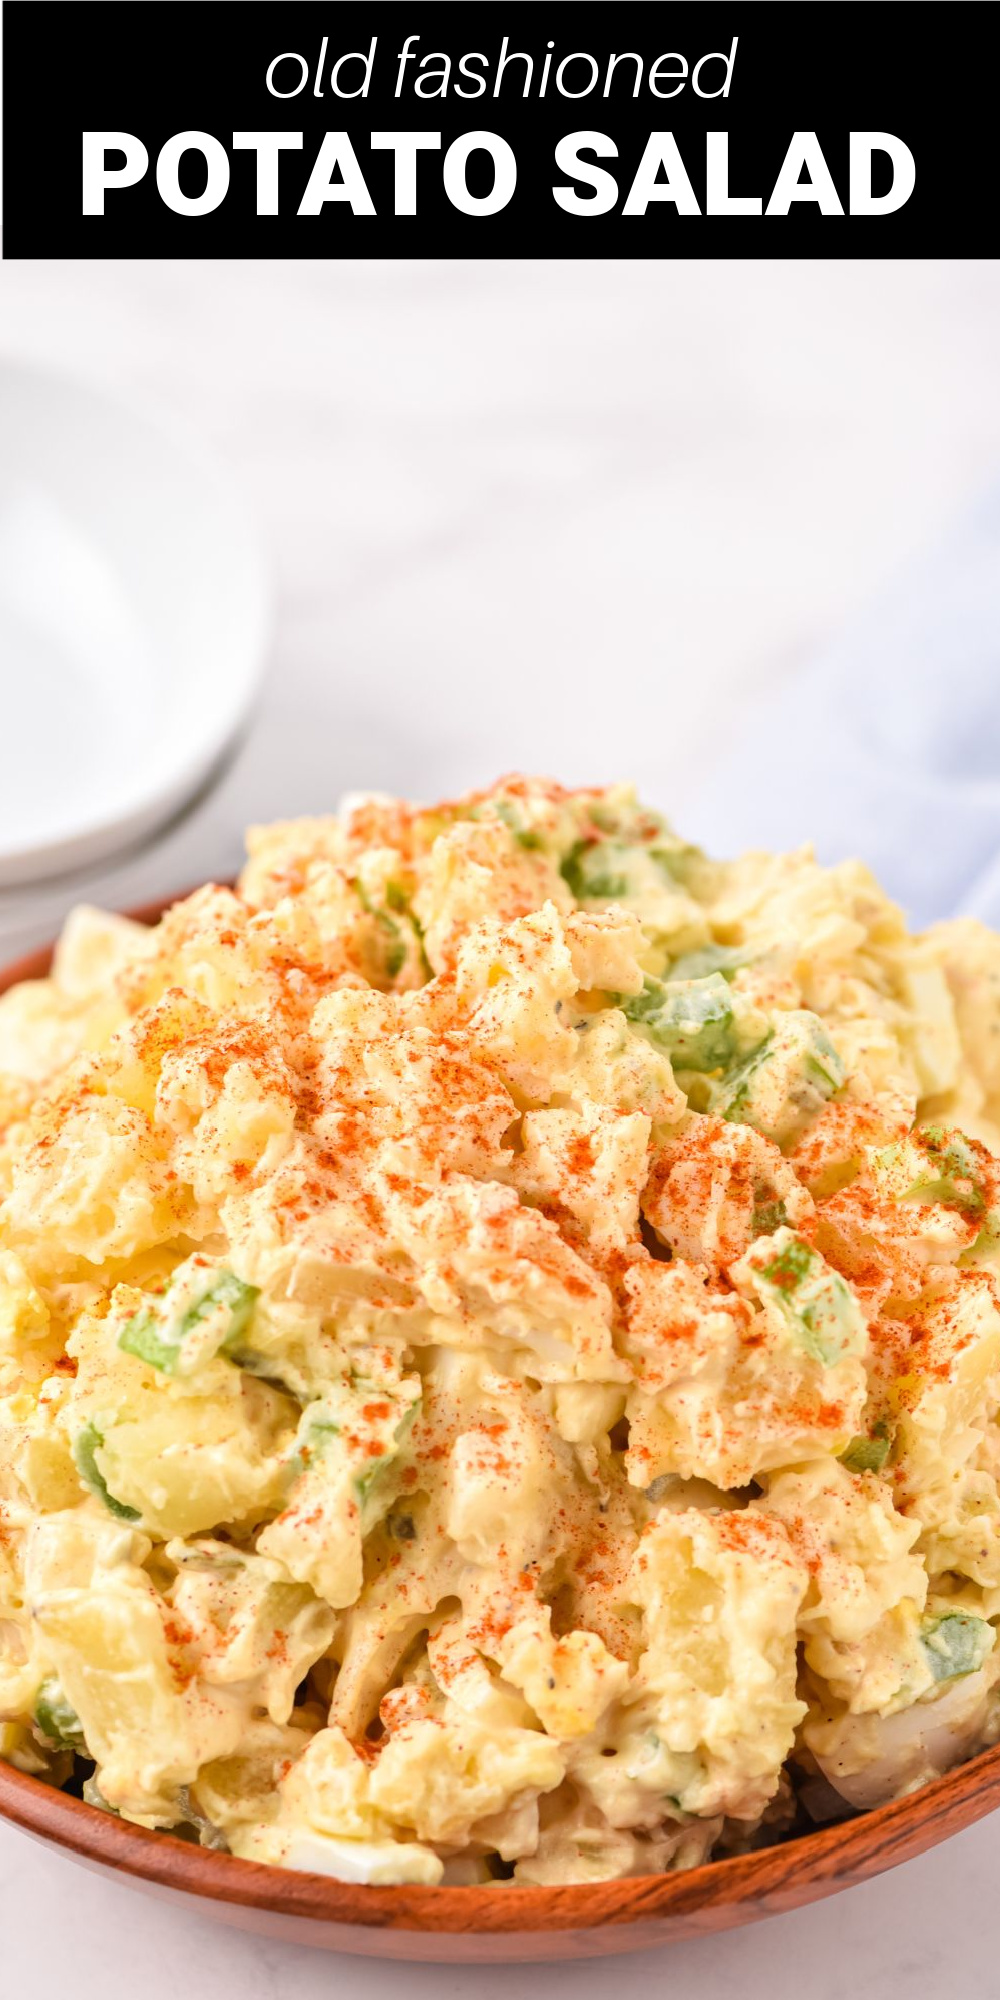 Our very best Old Fashioned Potato Salad recipe is made with simple and classic ingredients. It's the perfect side dish for potlucks, picnics, backyard BBQ's and game day menus.